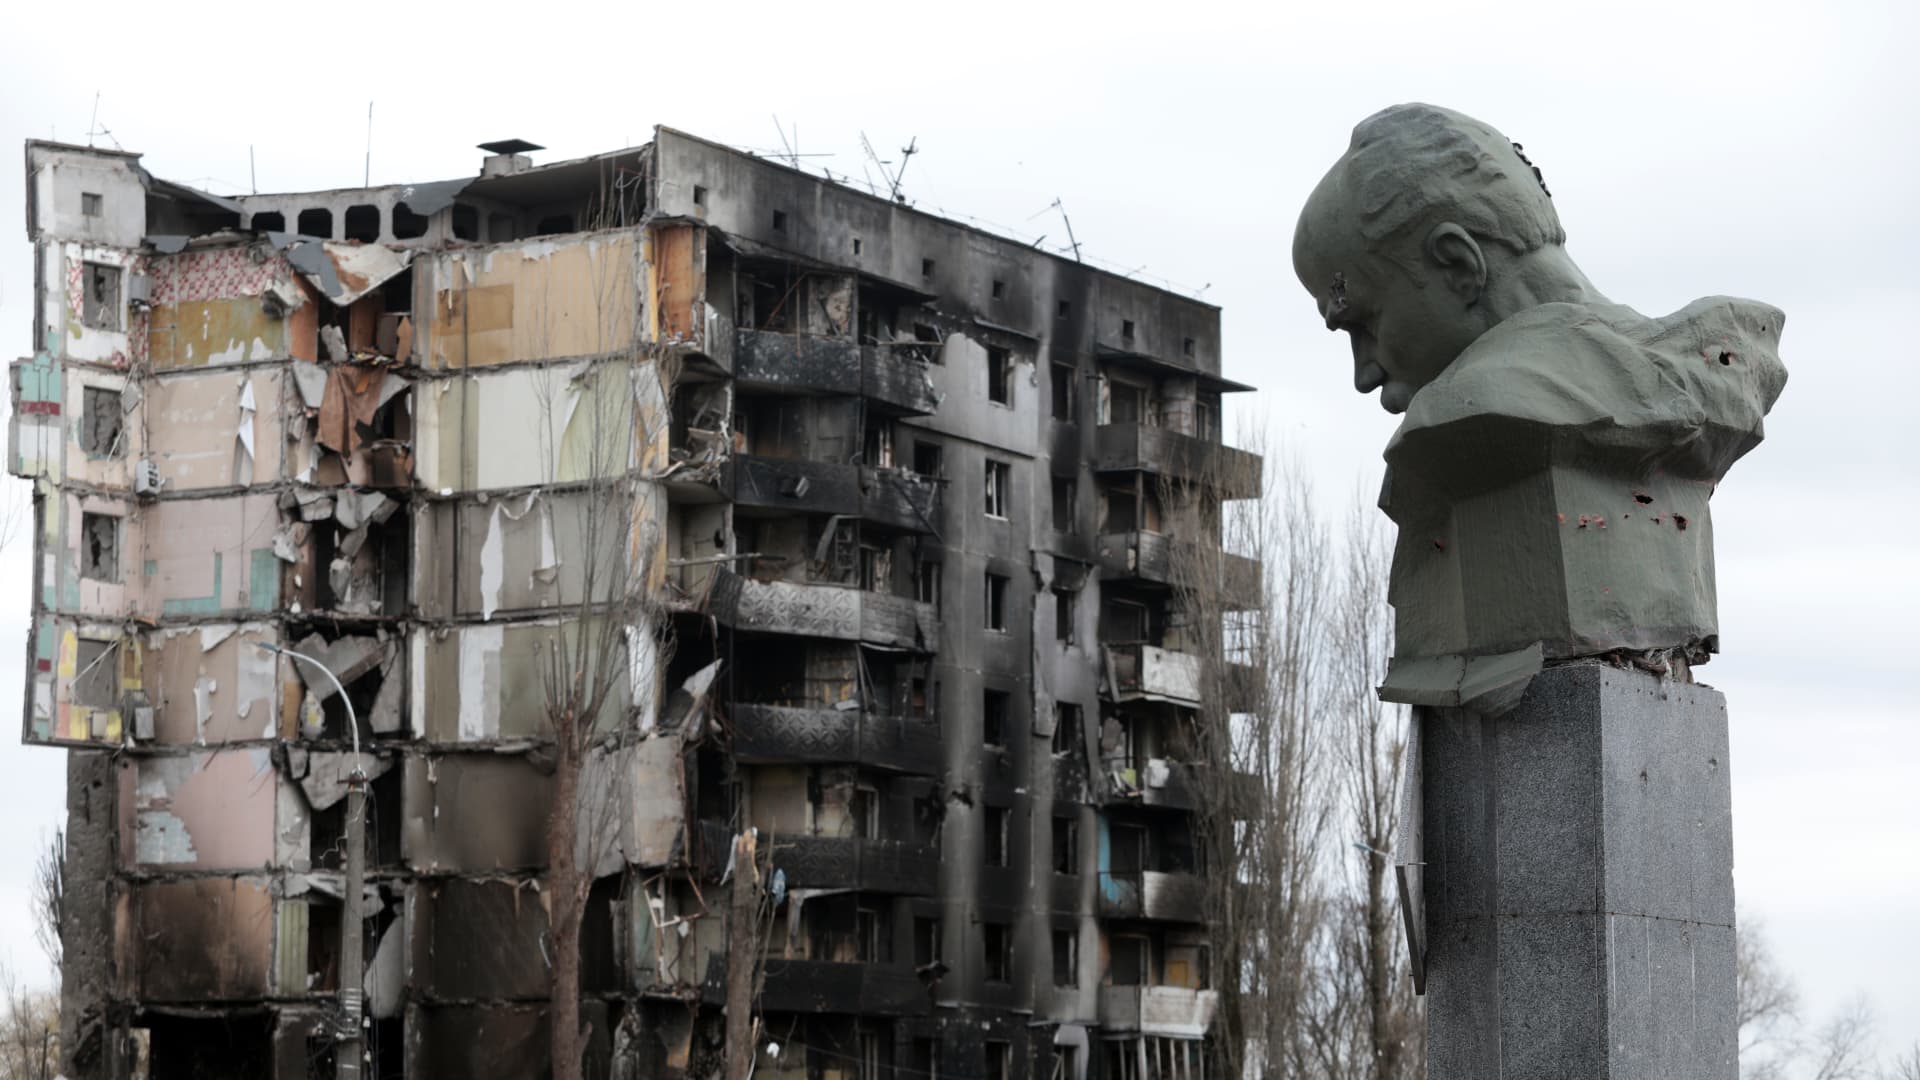 A monument to Taras Shevchenko is seen near a residential building destroyed by the russian army shelling in Borodyanka, Kyiv Region, north-central Ukraine.